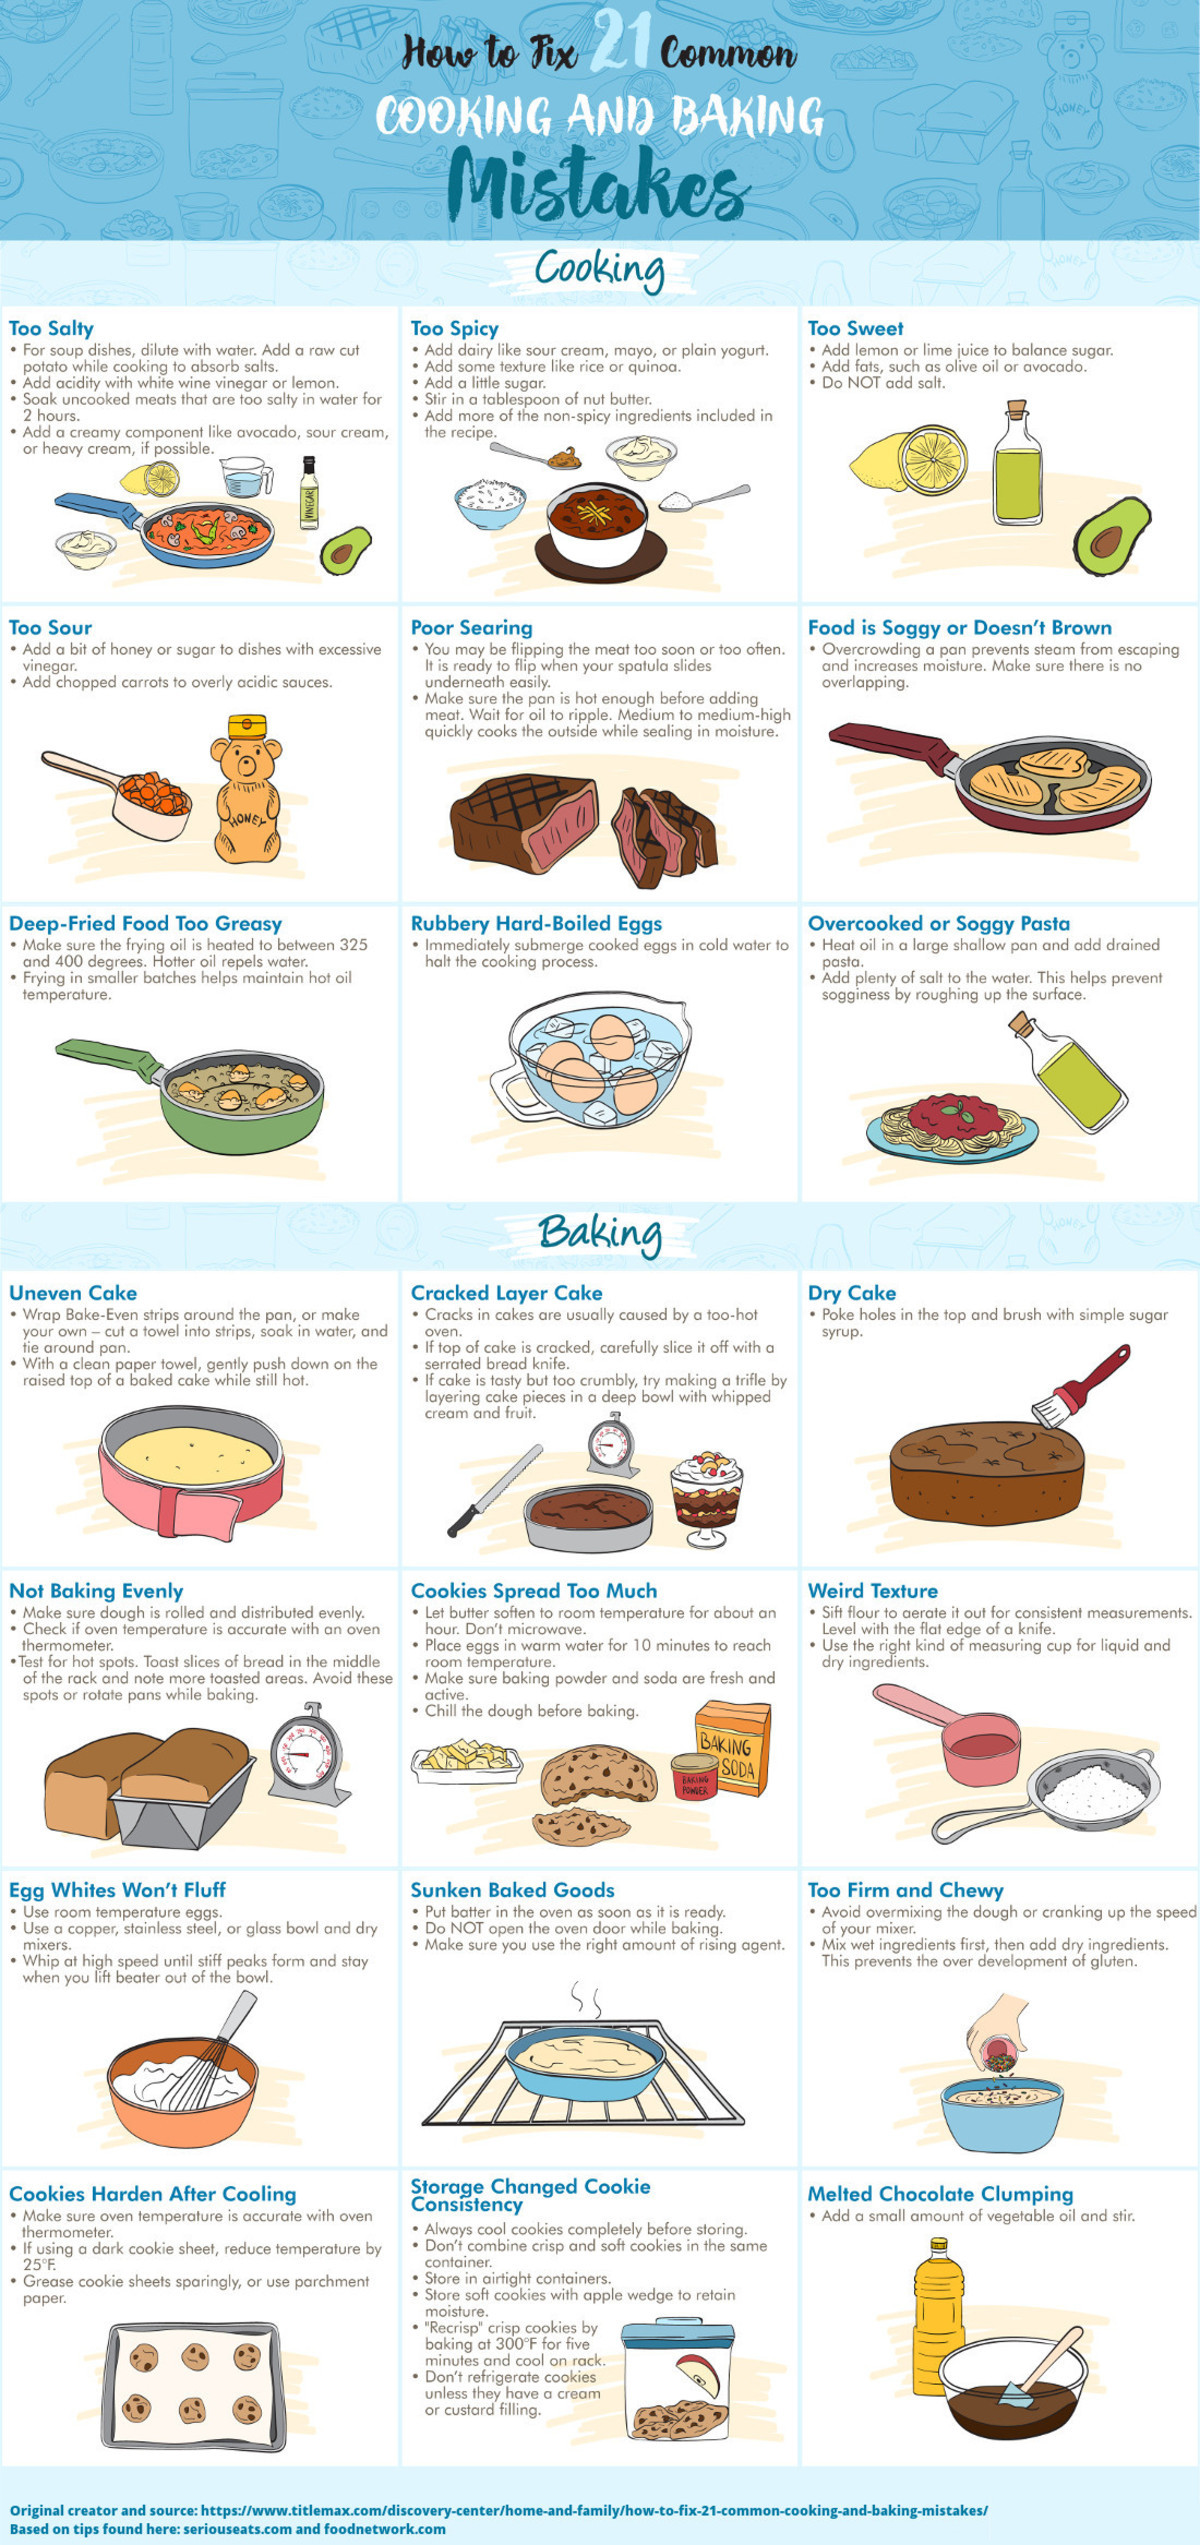 How To Fix 21 Common Cooking And Baking Mistakes